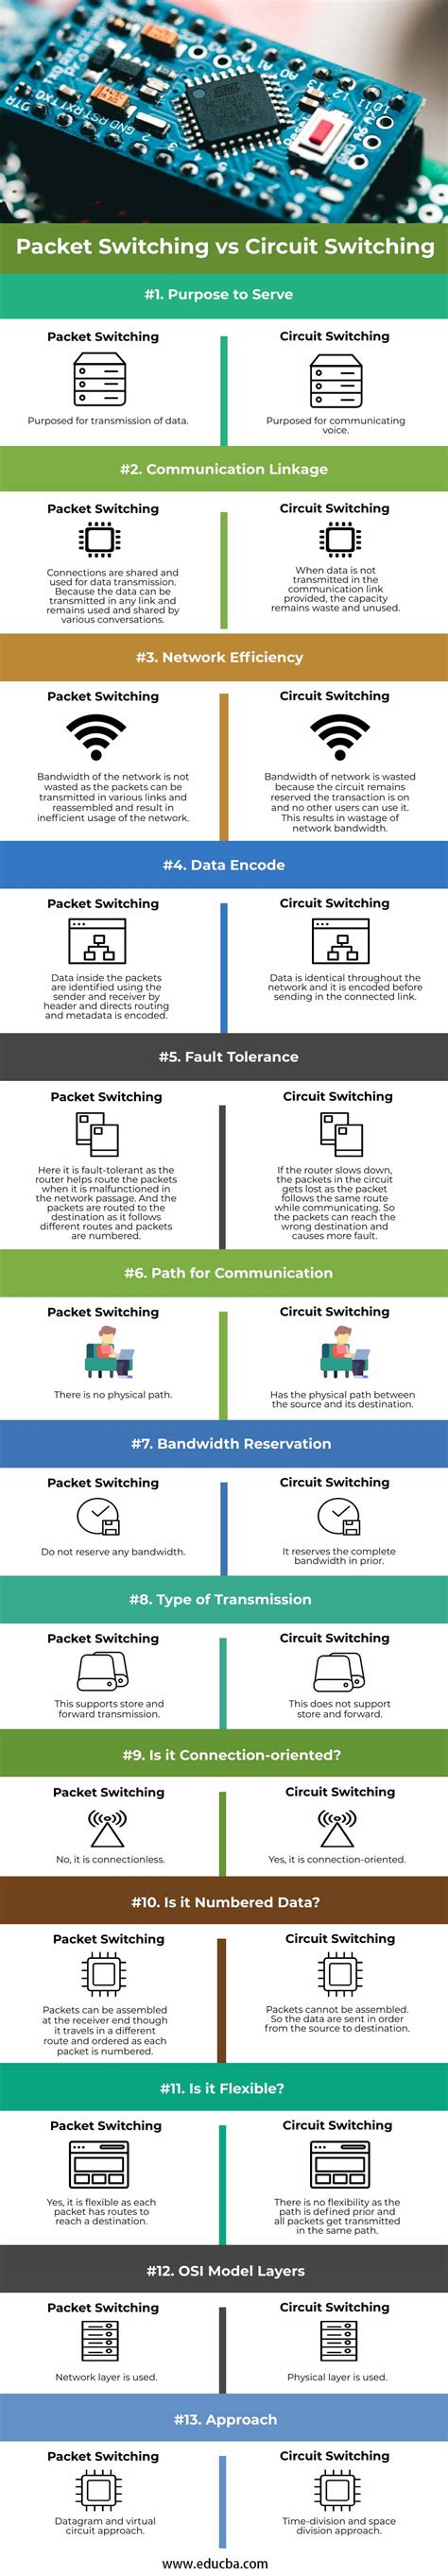 packet switching  circuit switching overview  top comparisons